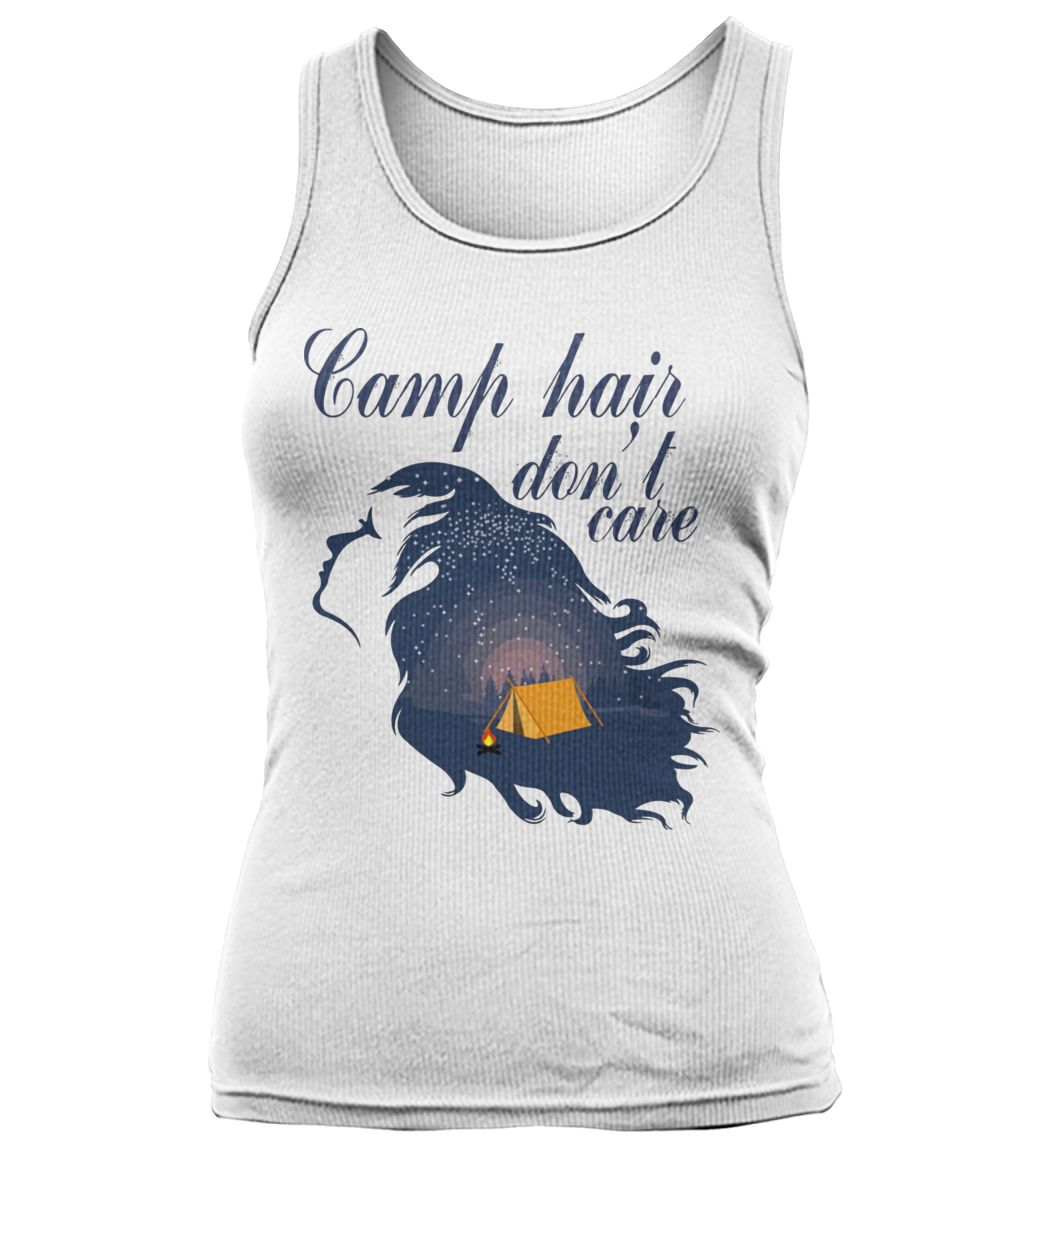 Camp hair don't care women's tank top